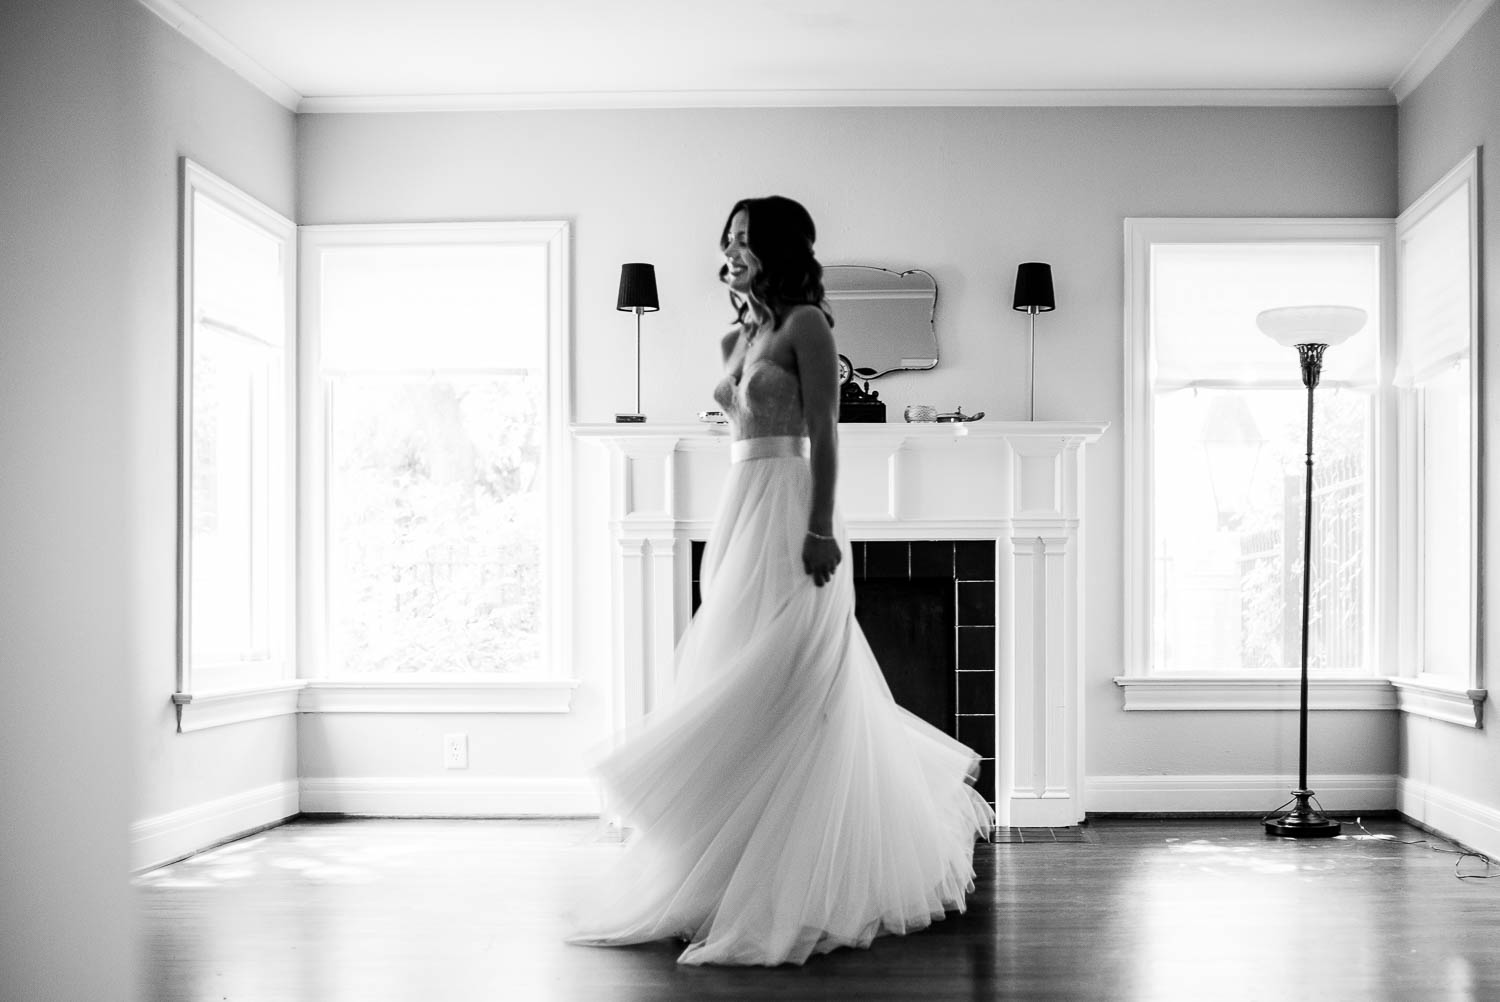 Bride spins and photographed along at Auntie's home with room cleared for a rehearsal dinner party the night prior -Leica photographer-Philip Thomas Photography